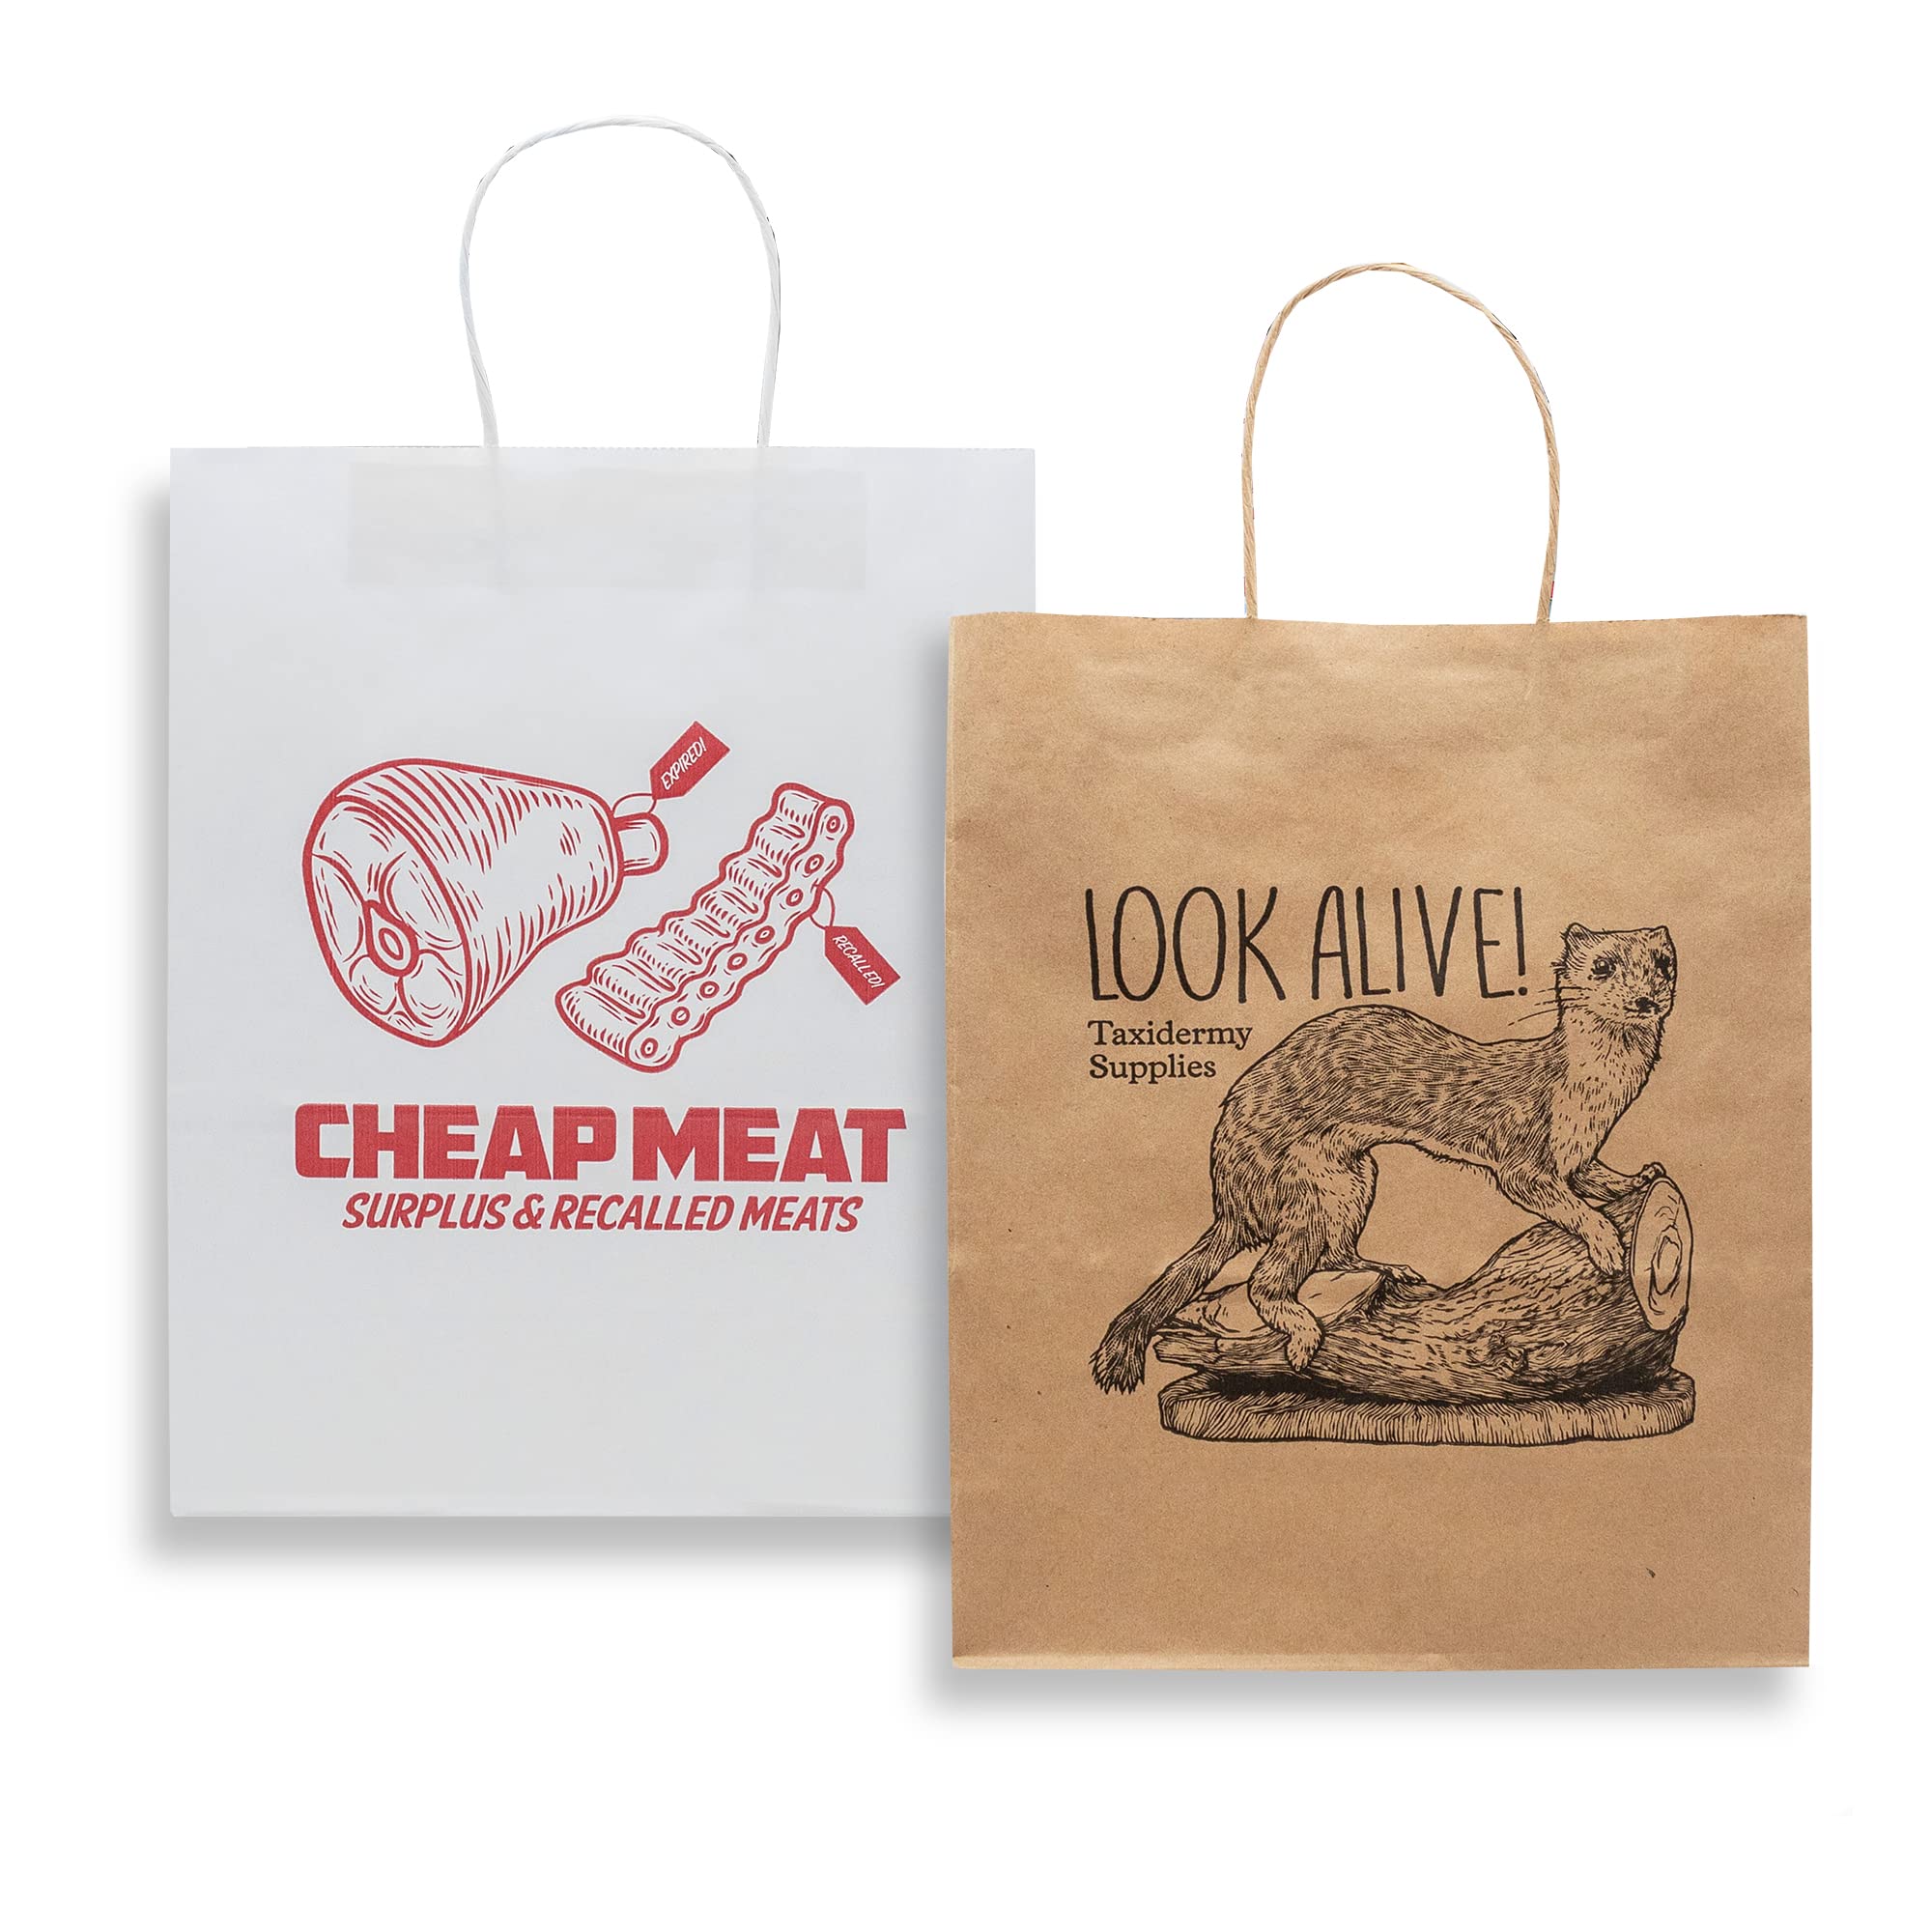 30 Watt Gift Bag (Pack of 2): Taxidermy + Cheap Meat, (1) White & (1) Brown Paper Bag, Gag Gift Wrapping Idea for Birthday, Valentines & Christmas, Authentic Prank Gift Bags for Novelty Gifting